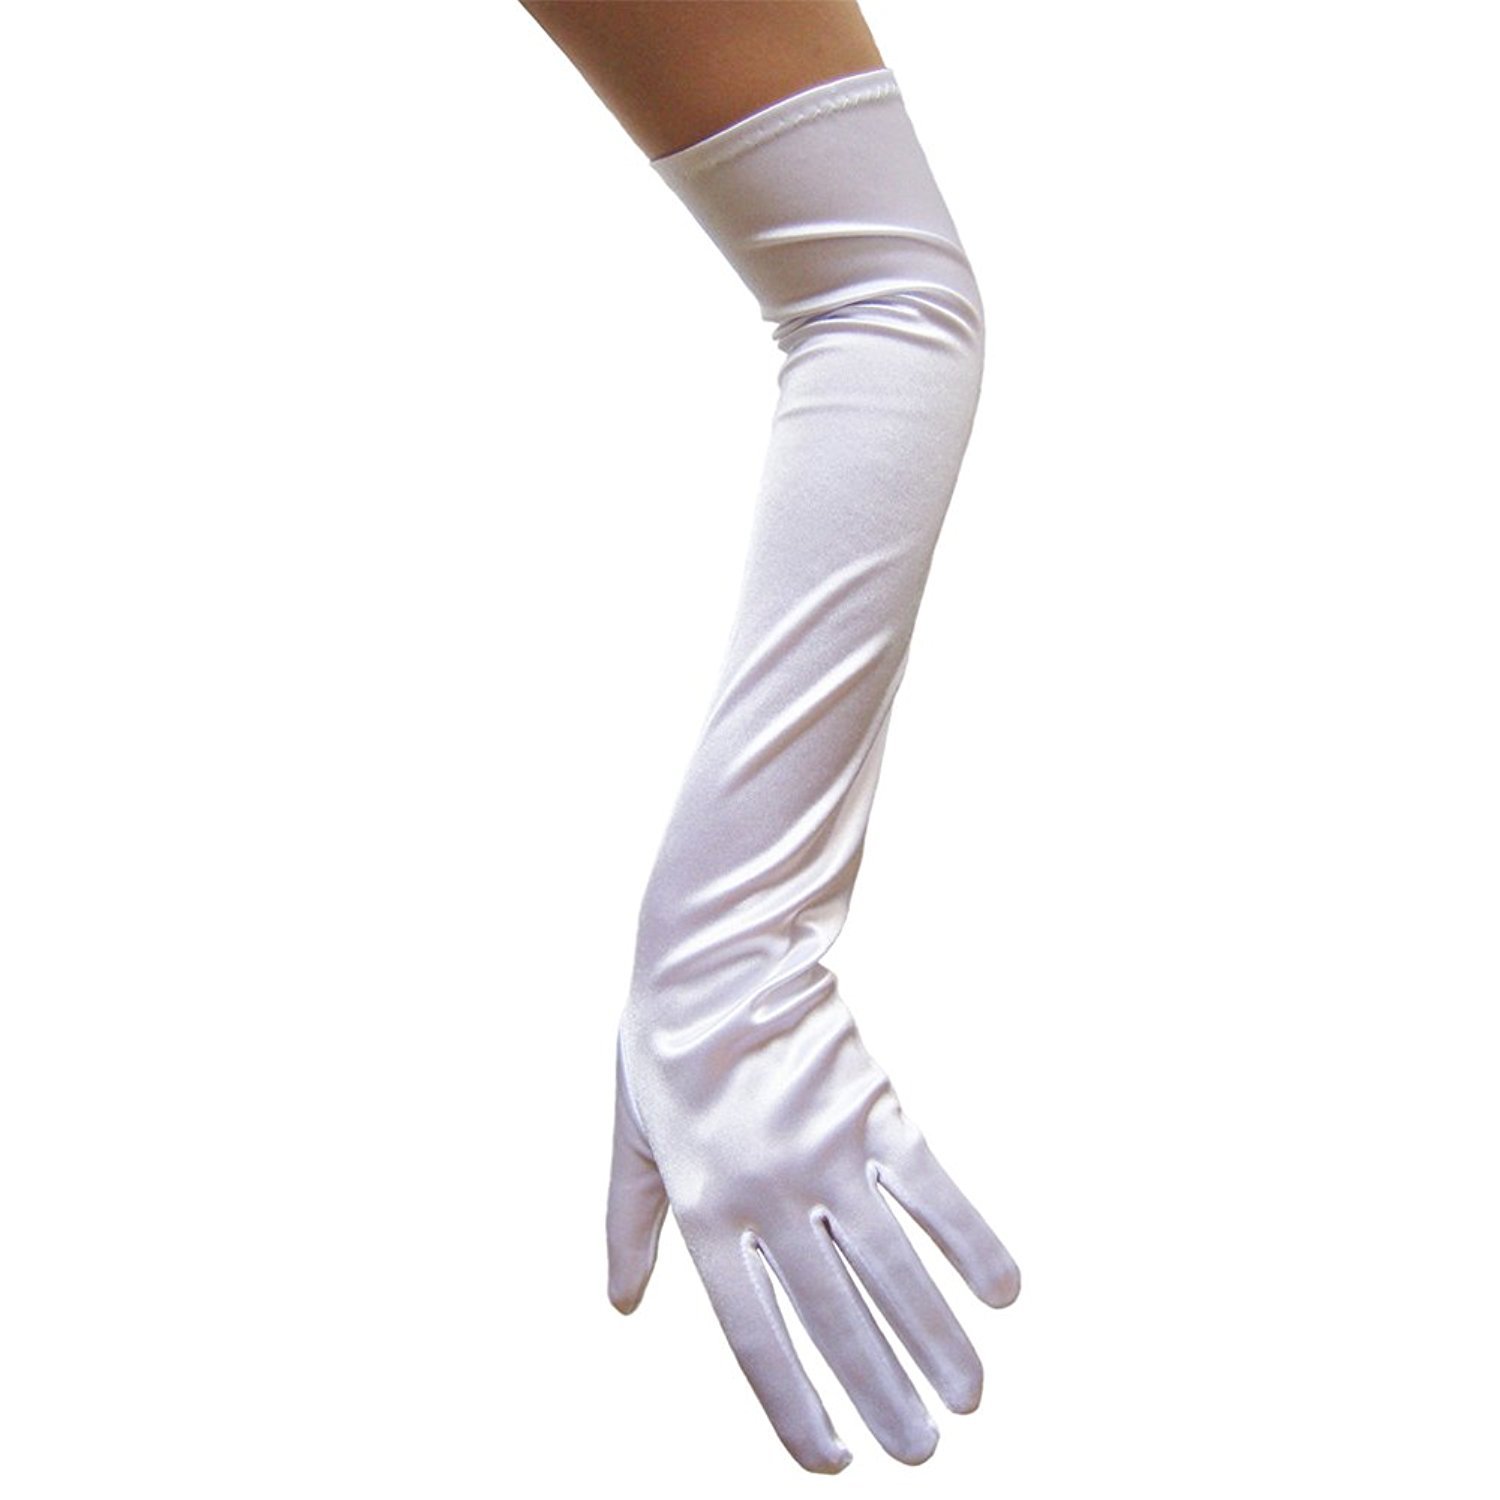 Long Opera Party Gloves for Women 1920s 20s Satin Gloves Costumes Elbow Length Bridal Evening Dress, 22 inches